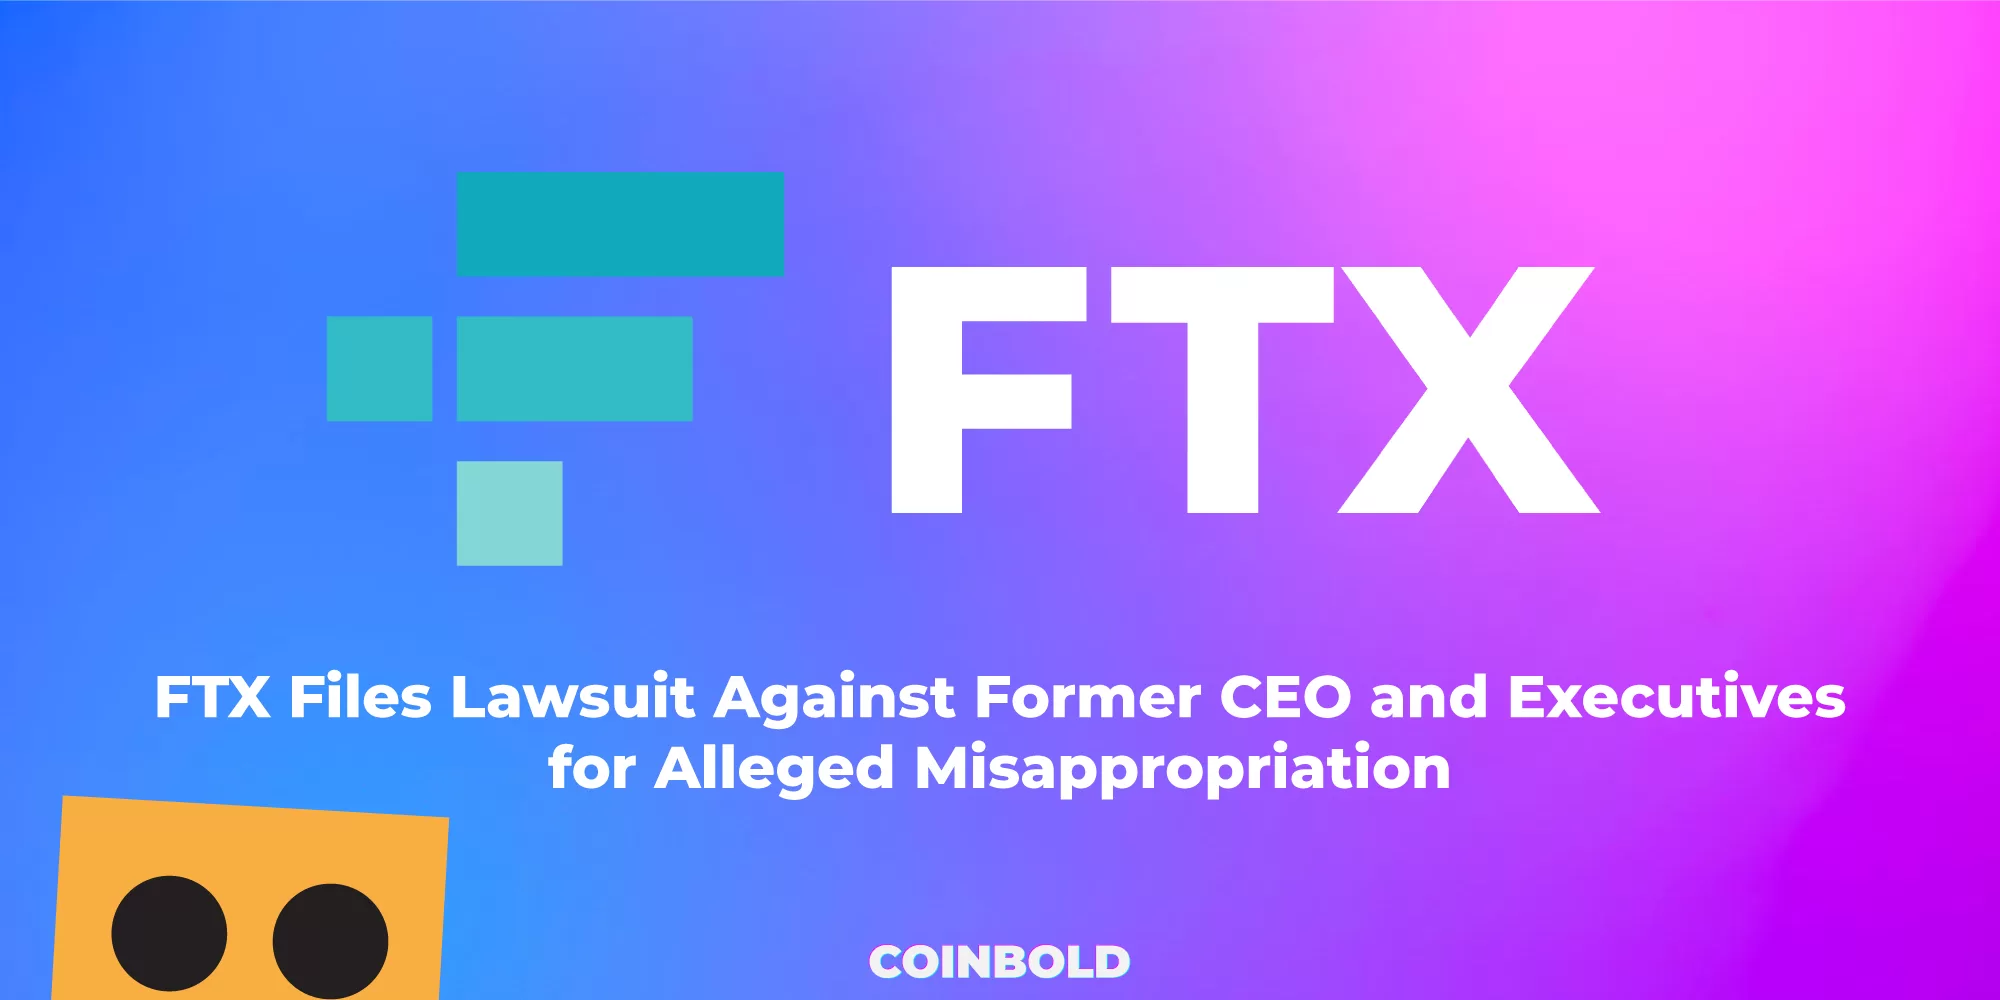 FTX Files Lawsuit Against Former CEO and Executives for Alleged Misappropriation